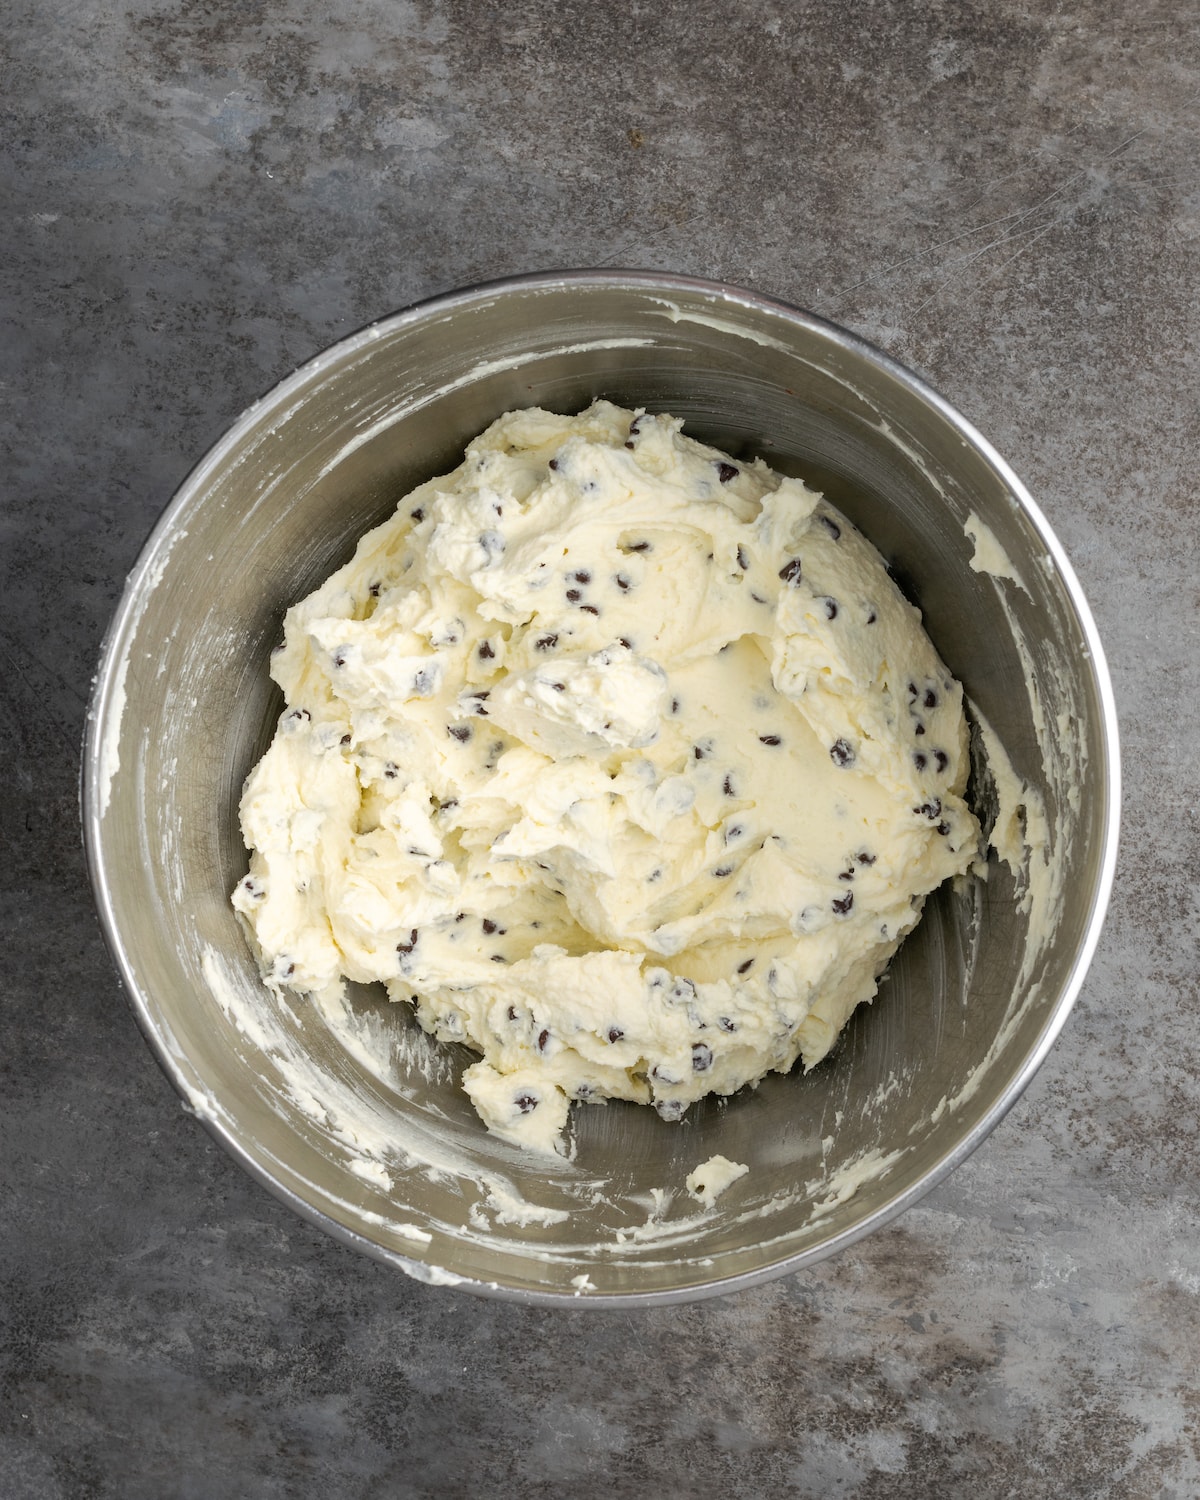 Chocolate chips added to the mascarpone filling ingredients in a metal mixing bowl.